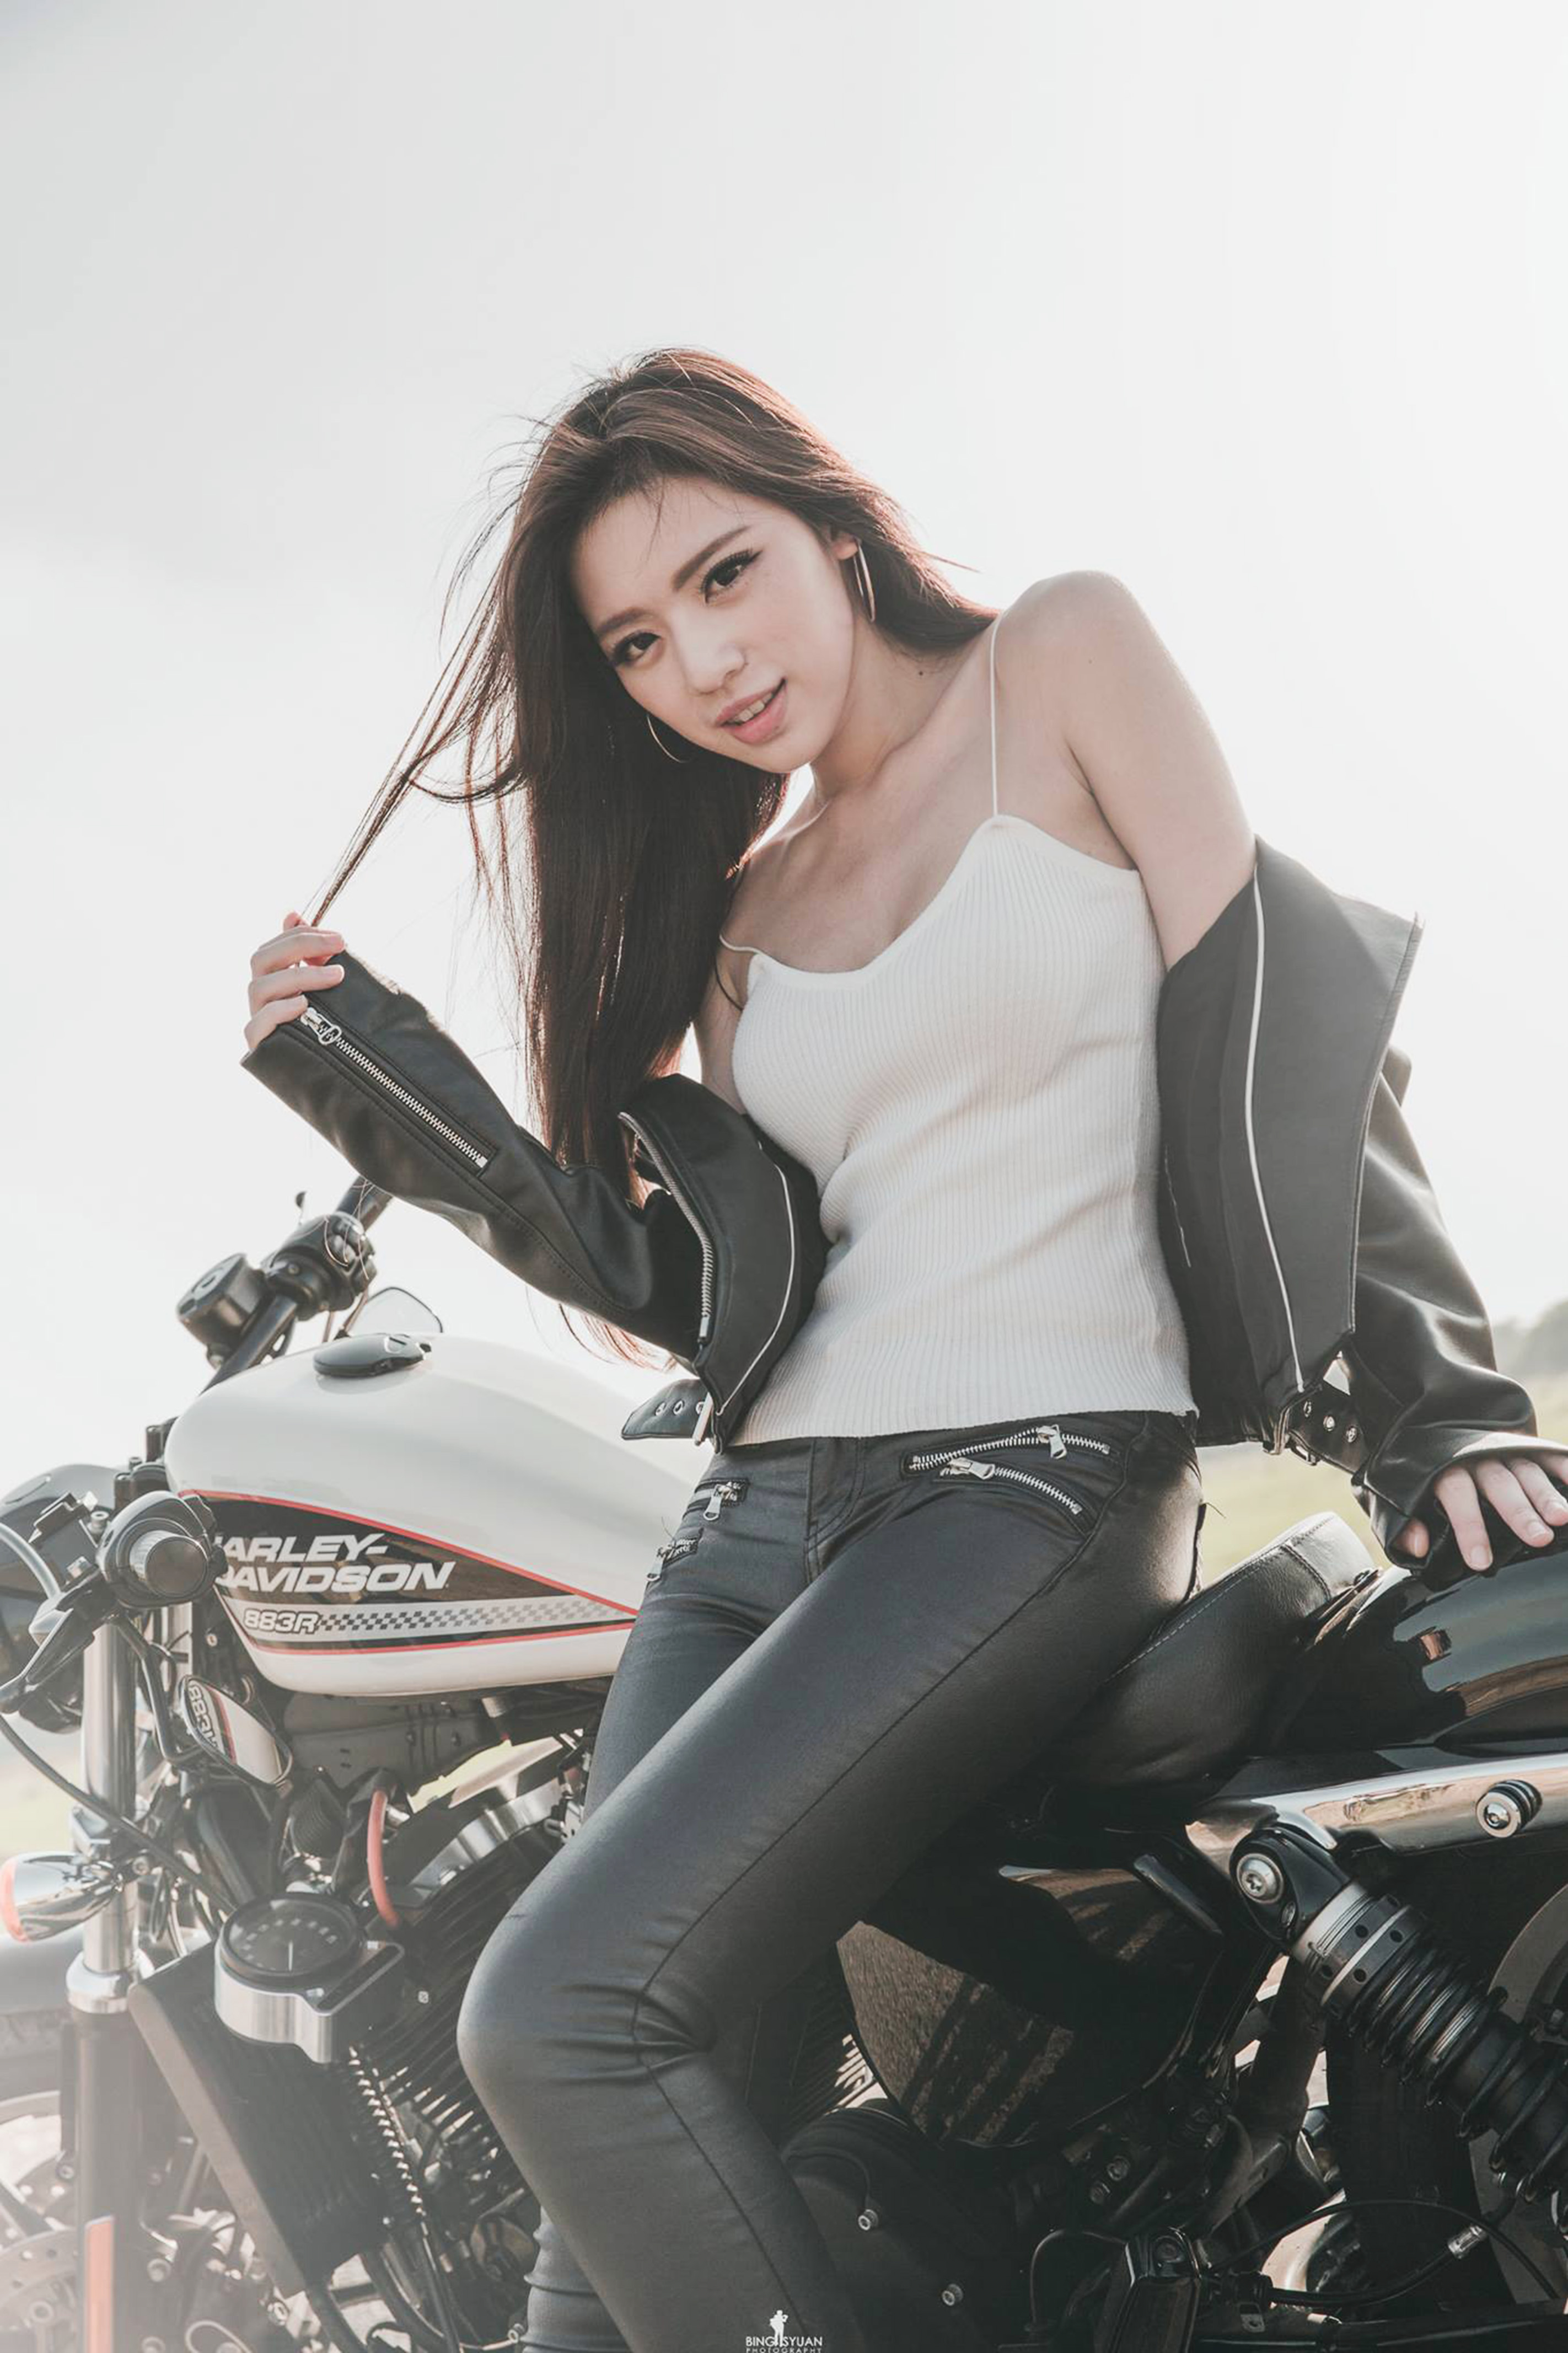 Brunette Asian Women Model Leather Pants Women With Bikes Leather Jackets Holding Hair Motorcycle Ta 2844x4267